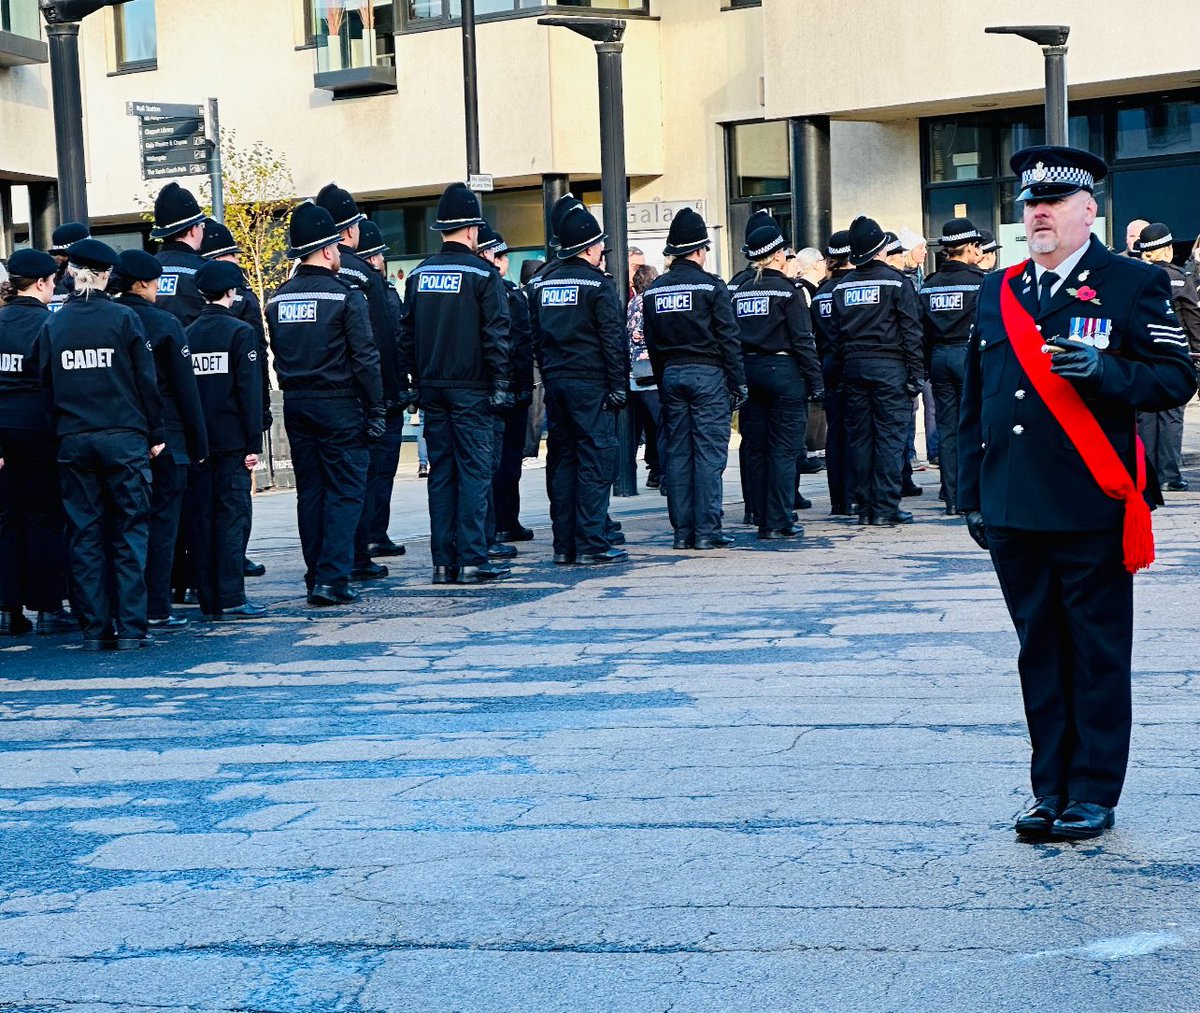 One again very proud to be Drill Sgt (Ret.) for todays Remembrance Parade through Durham City with serving officers & from training school alongside Durham @NationalVPC they did themselves & @DurhamPolice  proud @DAAC_999  @DurhamPCC